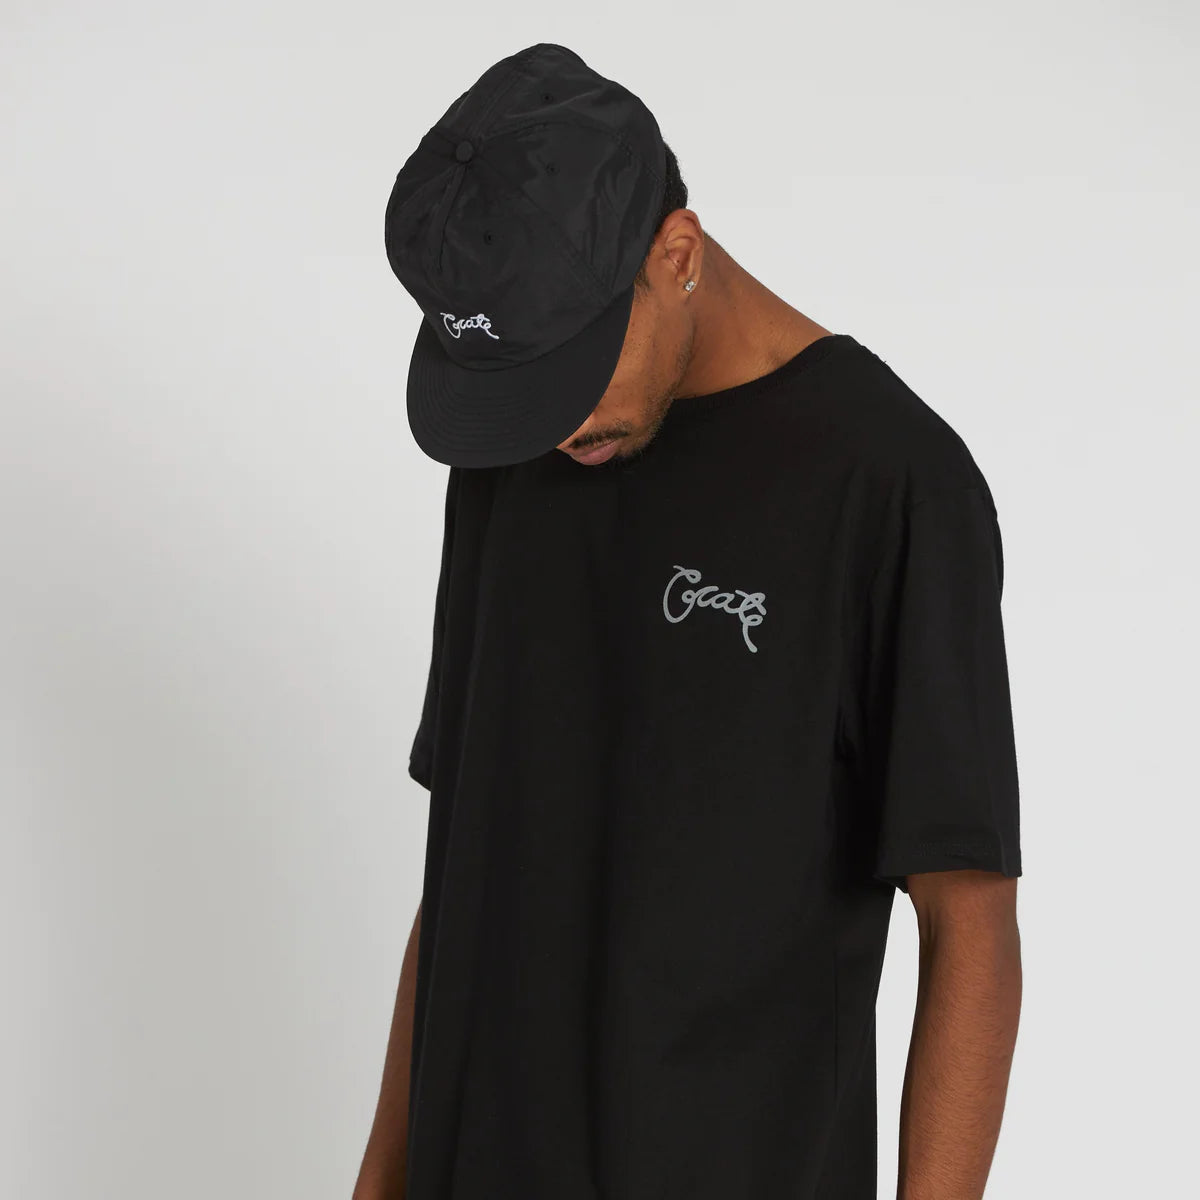 CRATE // Scripted T-Shirt BLACK/REFLECTIVE